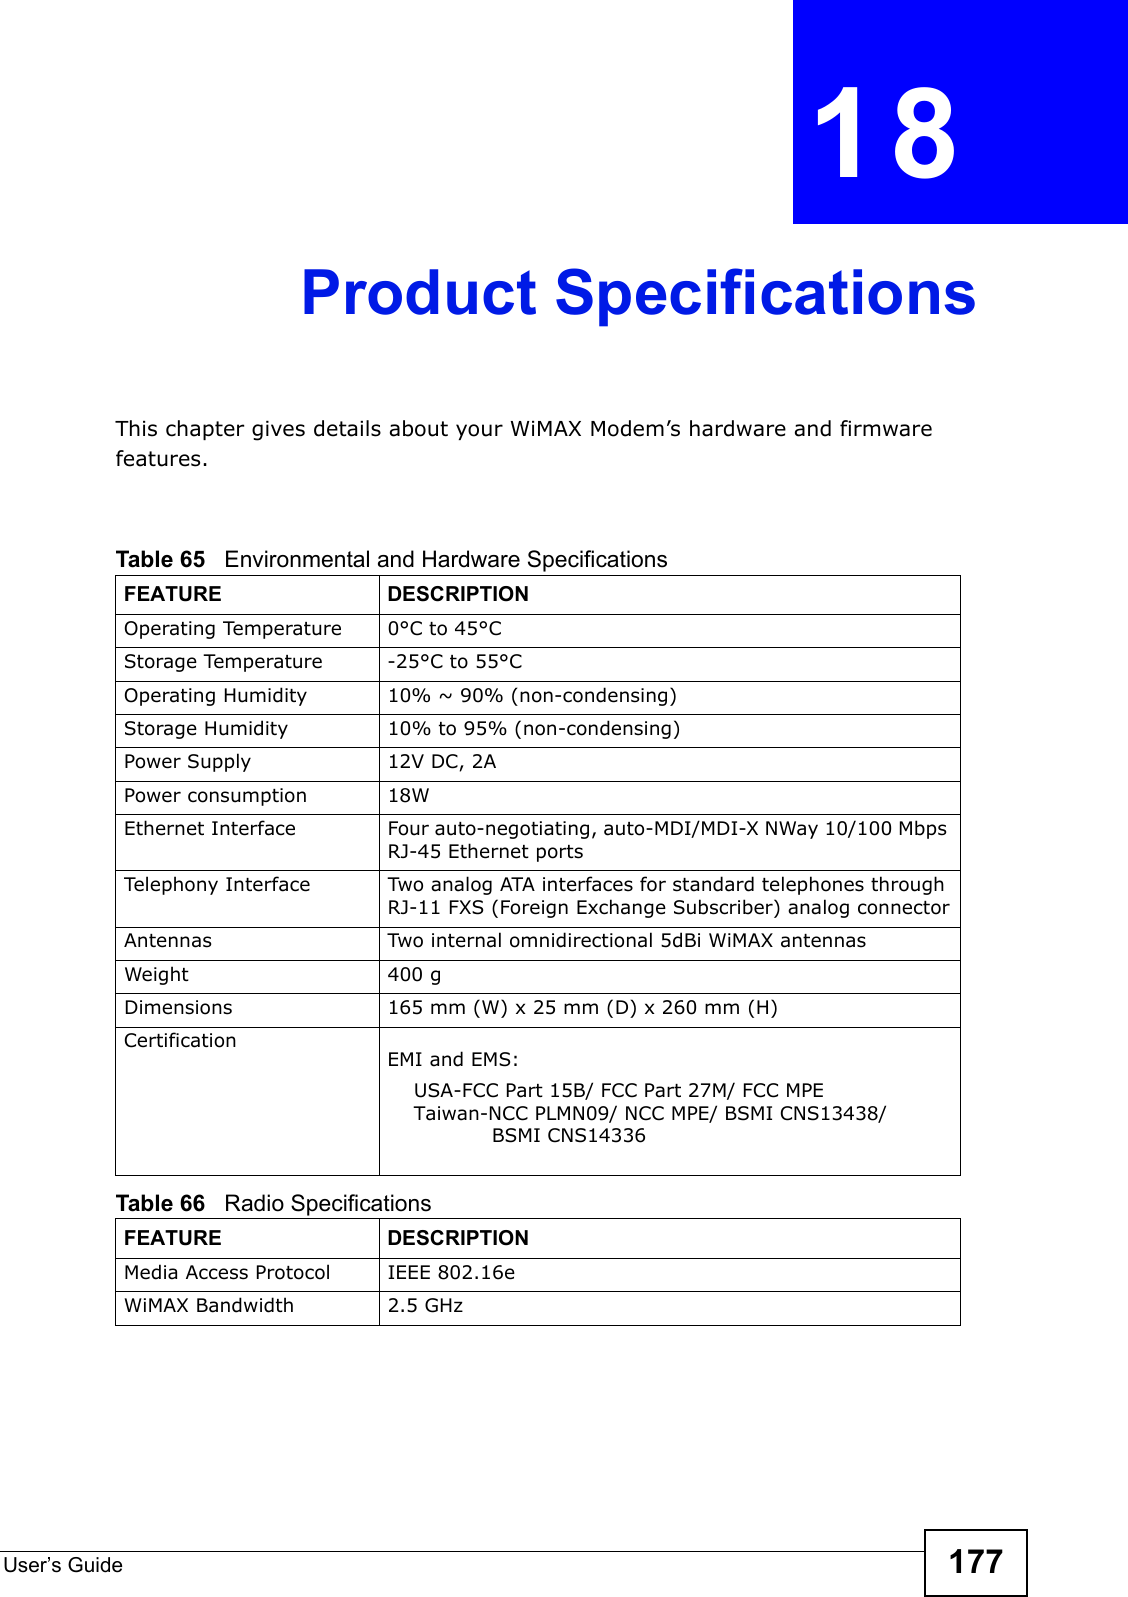 User’s Guide 177CHAPTER18Product SpecificationsThis chapter gives details about your WiMAX Modem’s hardware and firmware features.                     Table 65   Environmental and Hardware SpecificationsFEATURE DESCRIPTIONOperating Temperature 0°C to 45°CStorage Temperature -25°C to 55°COperating Humidity10% ~ 90% (non-condensing)Storage Humidity 10% to 95% (non-condensing)Power Supply 12V DC, 2APower consumption 18WEthernet Interface Four auto-negotiating, auto-MDI/MDI-X NWay 10/100 Mbps RJ-45 Ethernet portsTelephony Interface Two analog ATA interfaces for standard telephones through RJ-11 FXS (Foreign Exchange Subscriber) analog connectorAntennas Two internal omnidirectional 5dBi WiMAX antennasg 004thgieWDimensions165 mm (W) x 25 mm (D) x 260 mm (H)CertificationEMI and EMS: USA-FCC Part 15B/ FCC Part 27M/ FCC MPETaiwan-NCC PLMN09/ NCC MPE/ BSMI CNS13438/             BSMI CNS14336  Table 66   Radio SpecificationsFEATURE DESCRIPTIONMedia Access ProtocolIEEE 802.16eWiMAX Bandwidth 2.5 GHz